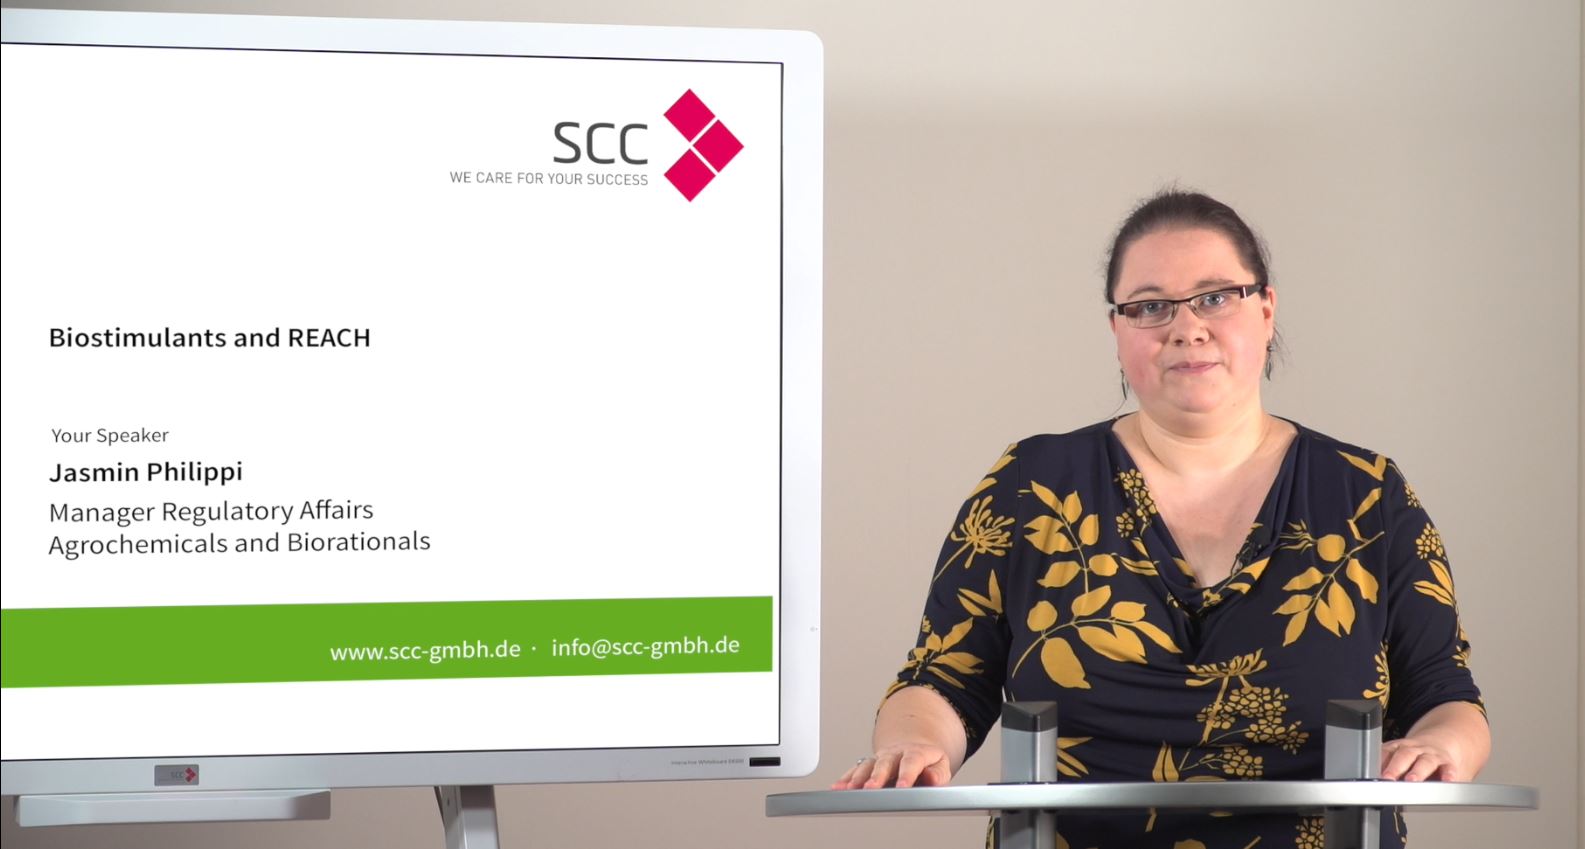 SCC video guidance on Biostimulants and REACH